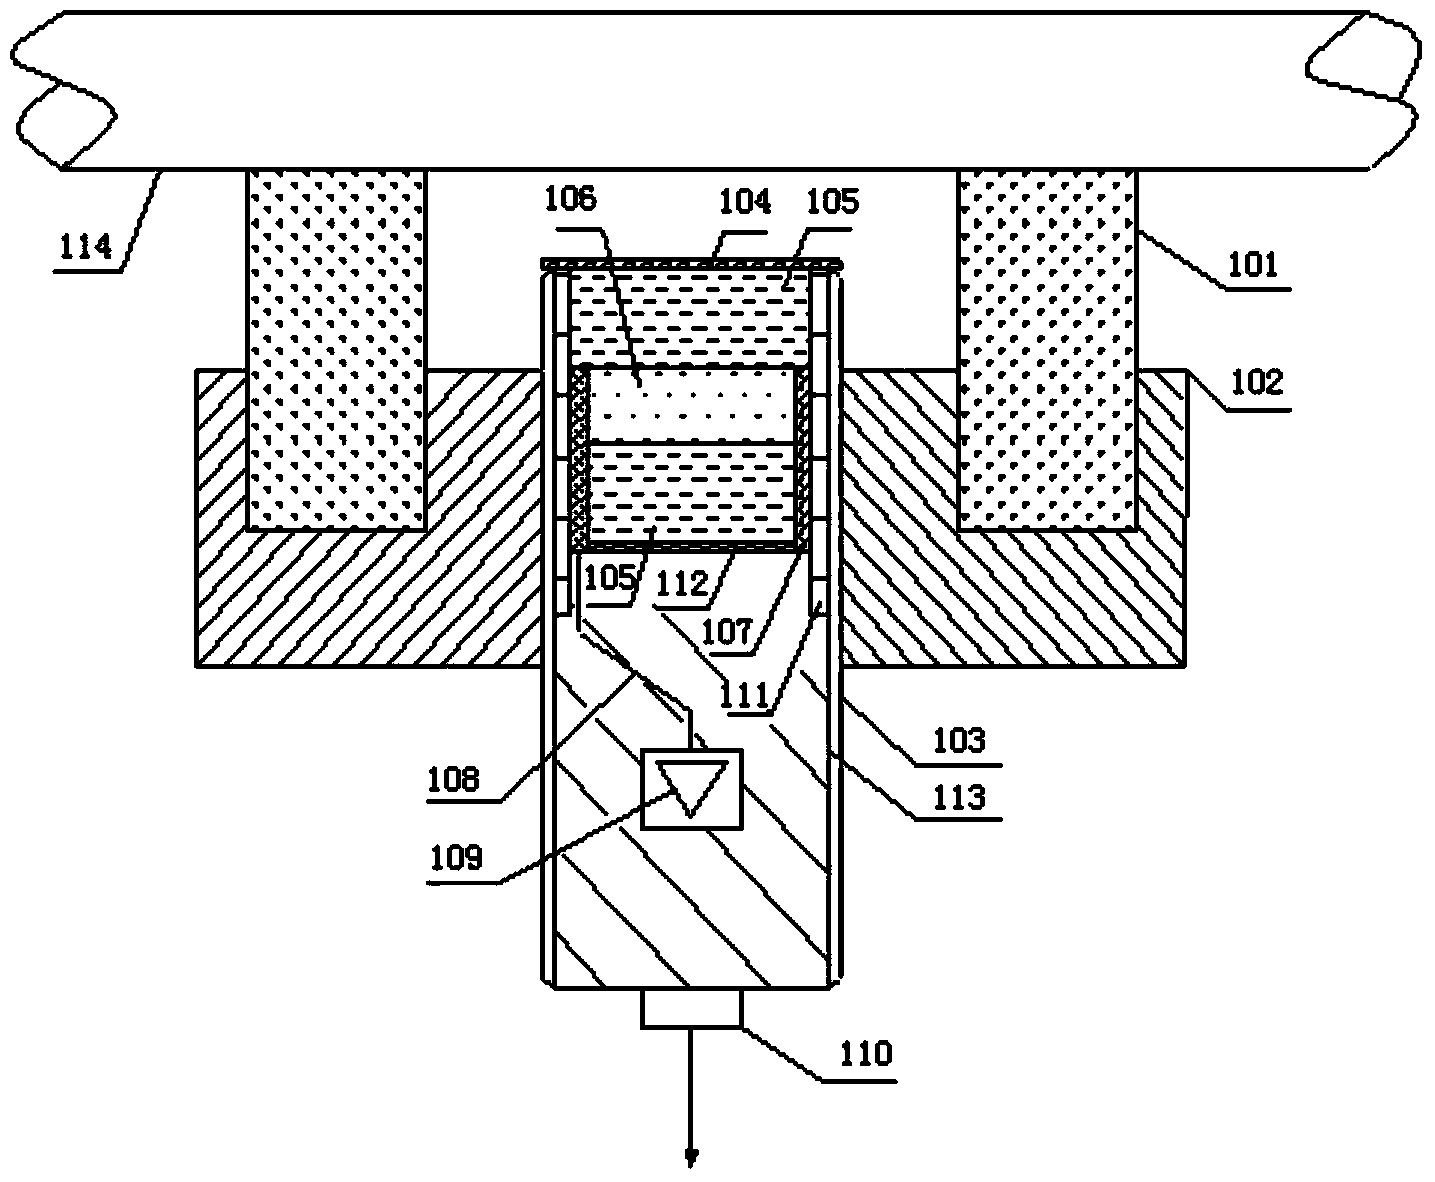 Gas pipeline leakage detecting and positioning system and method based on non-intrusive sensor